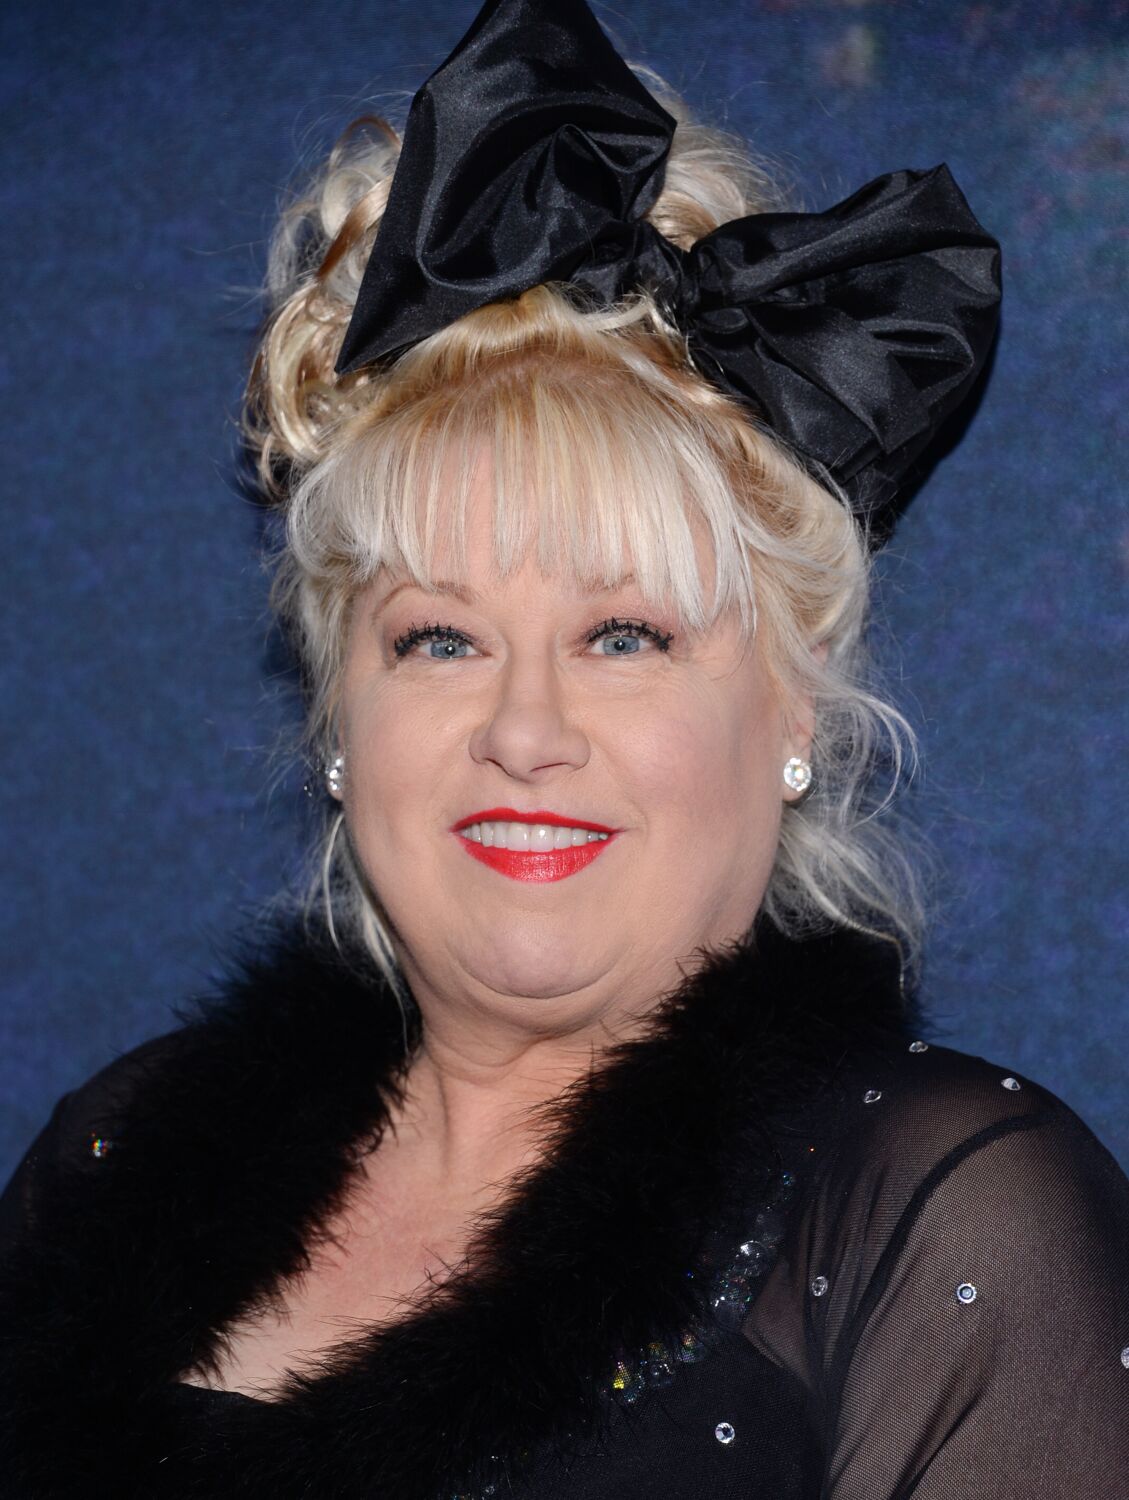 Former 'SNL' star Victoria Jackson adds her rant to anti-LGBTQ sentiment in Tennessee